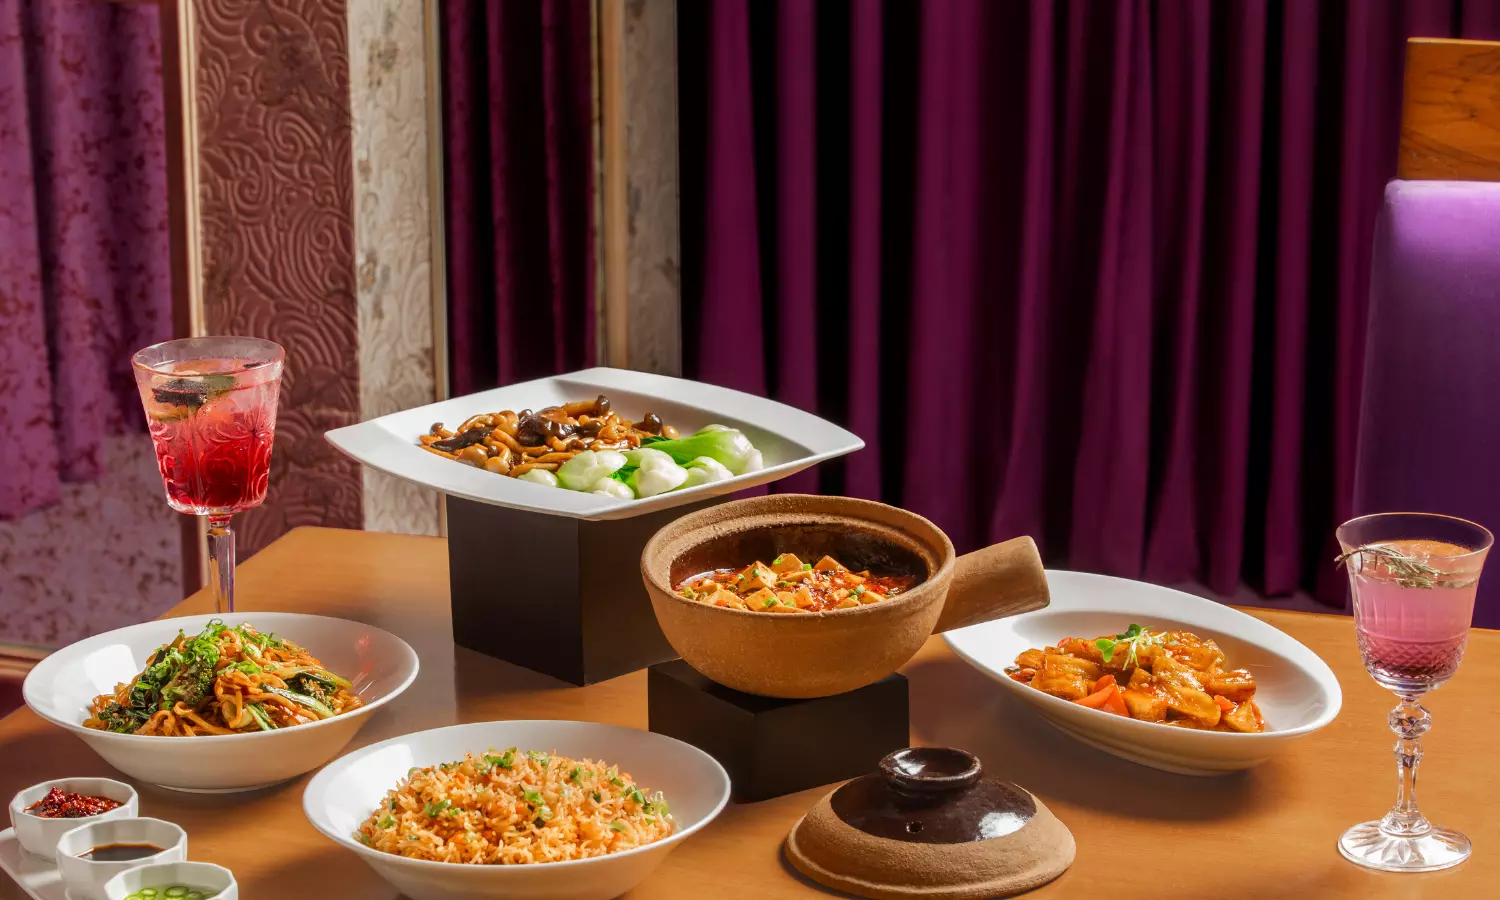 Yi Jing promises a near-authentic peek into the bustling streets of China, right here in Mumbai